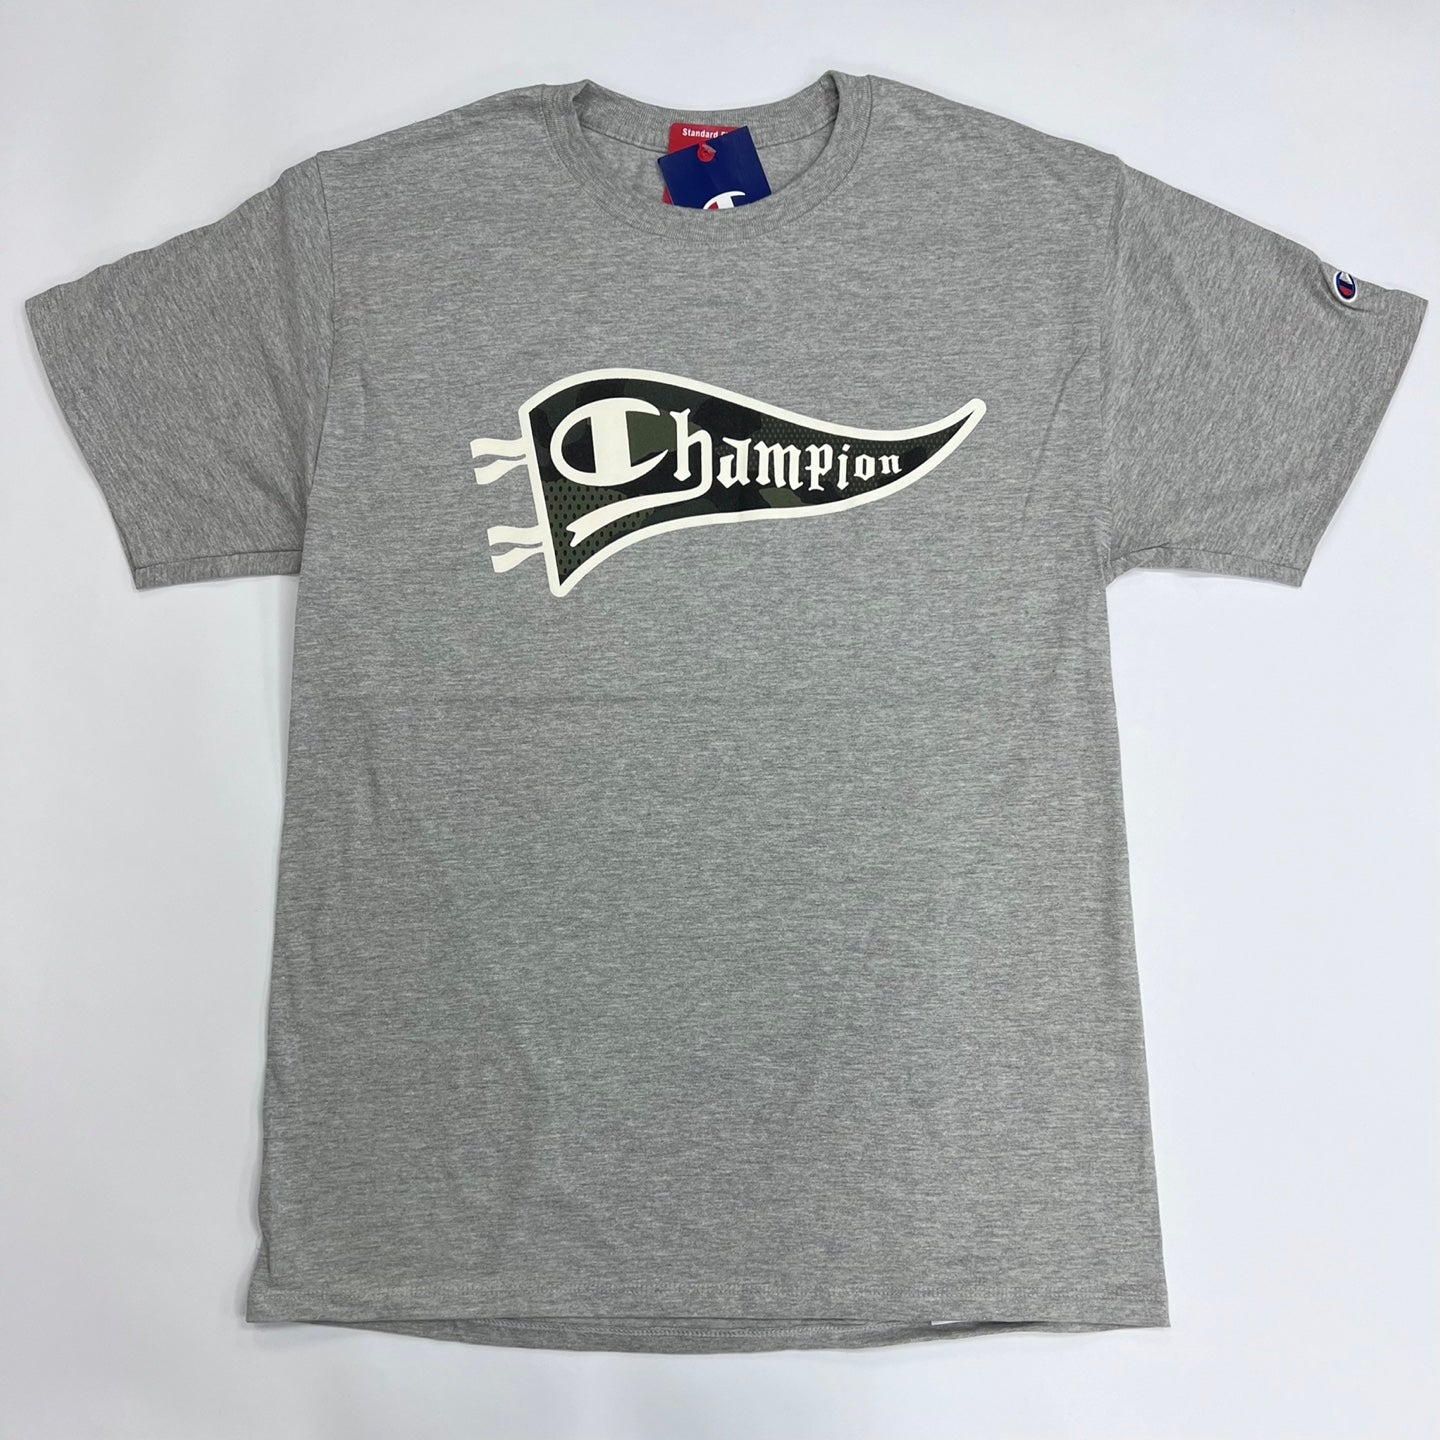 Champion Classic Patchwork Pennant K Graphic MOMO – Tee